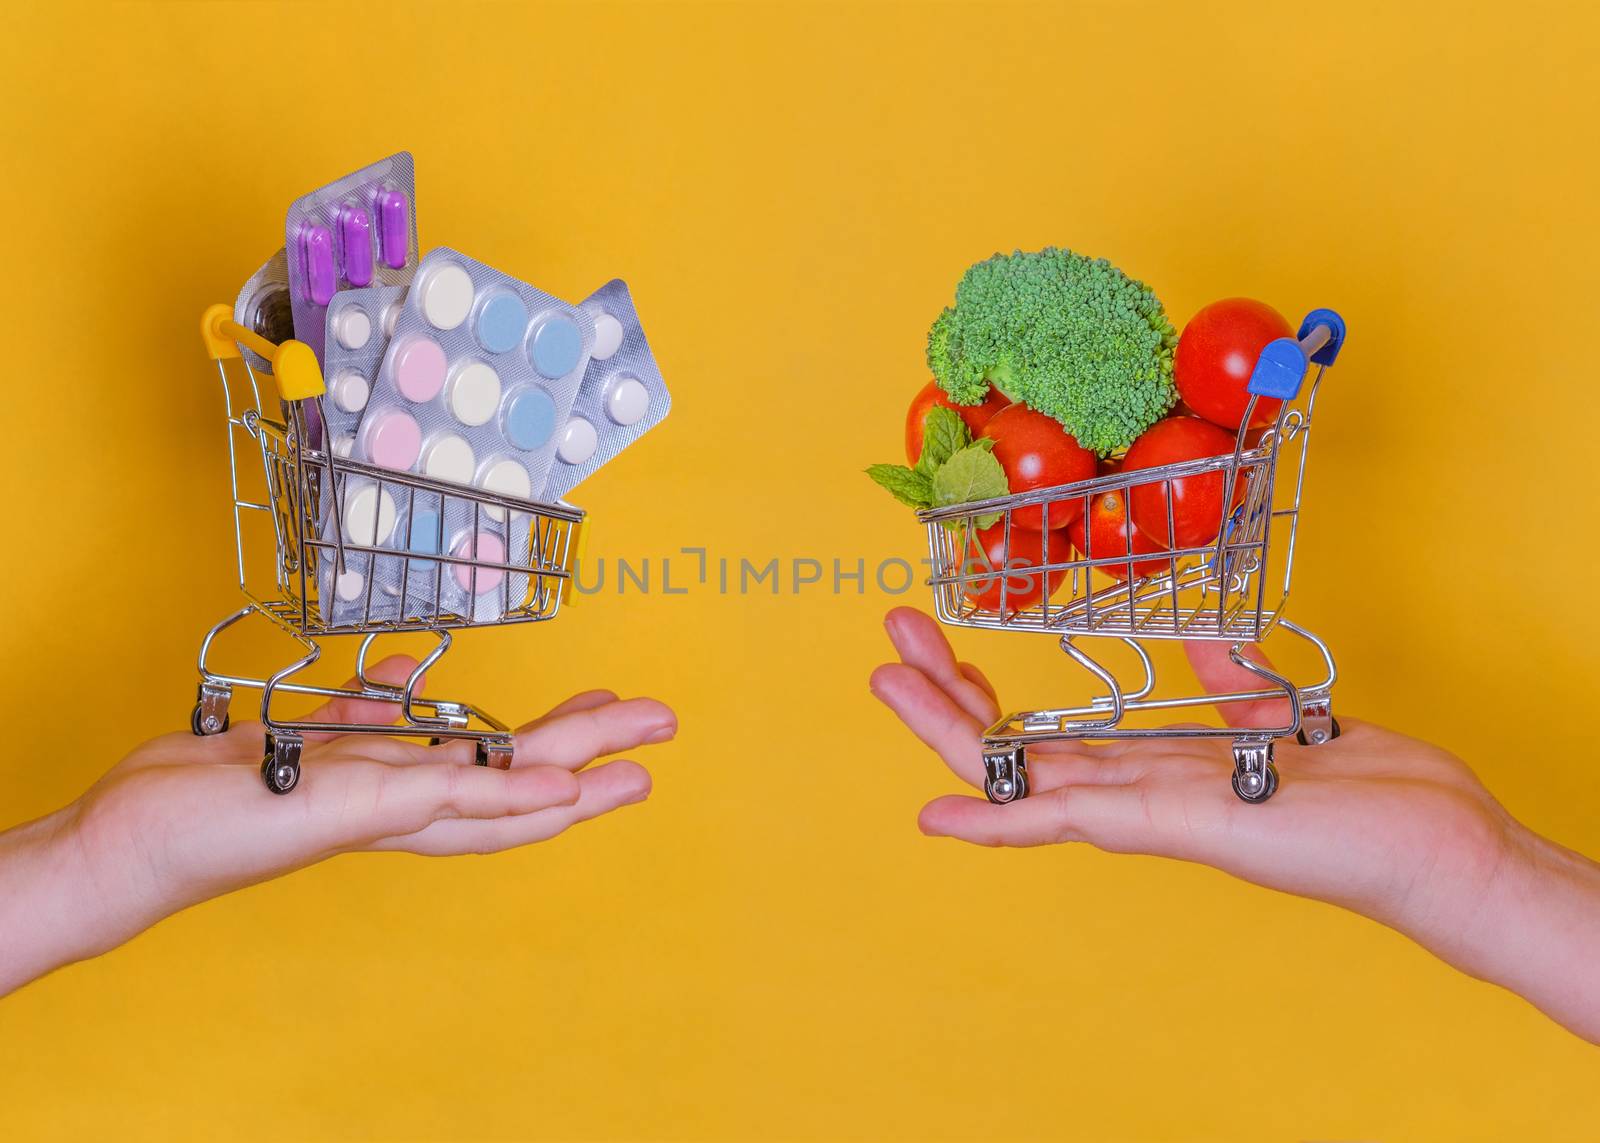 Hands holding shopping carts with vegetables and tablets on a yellow background, by Iryna_Melnyk